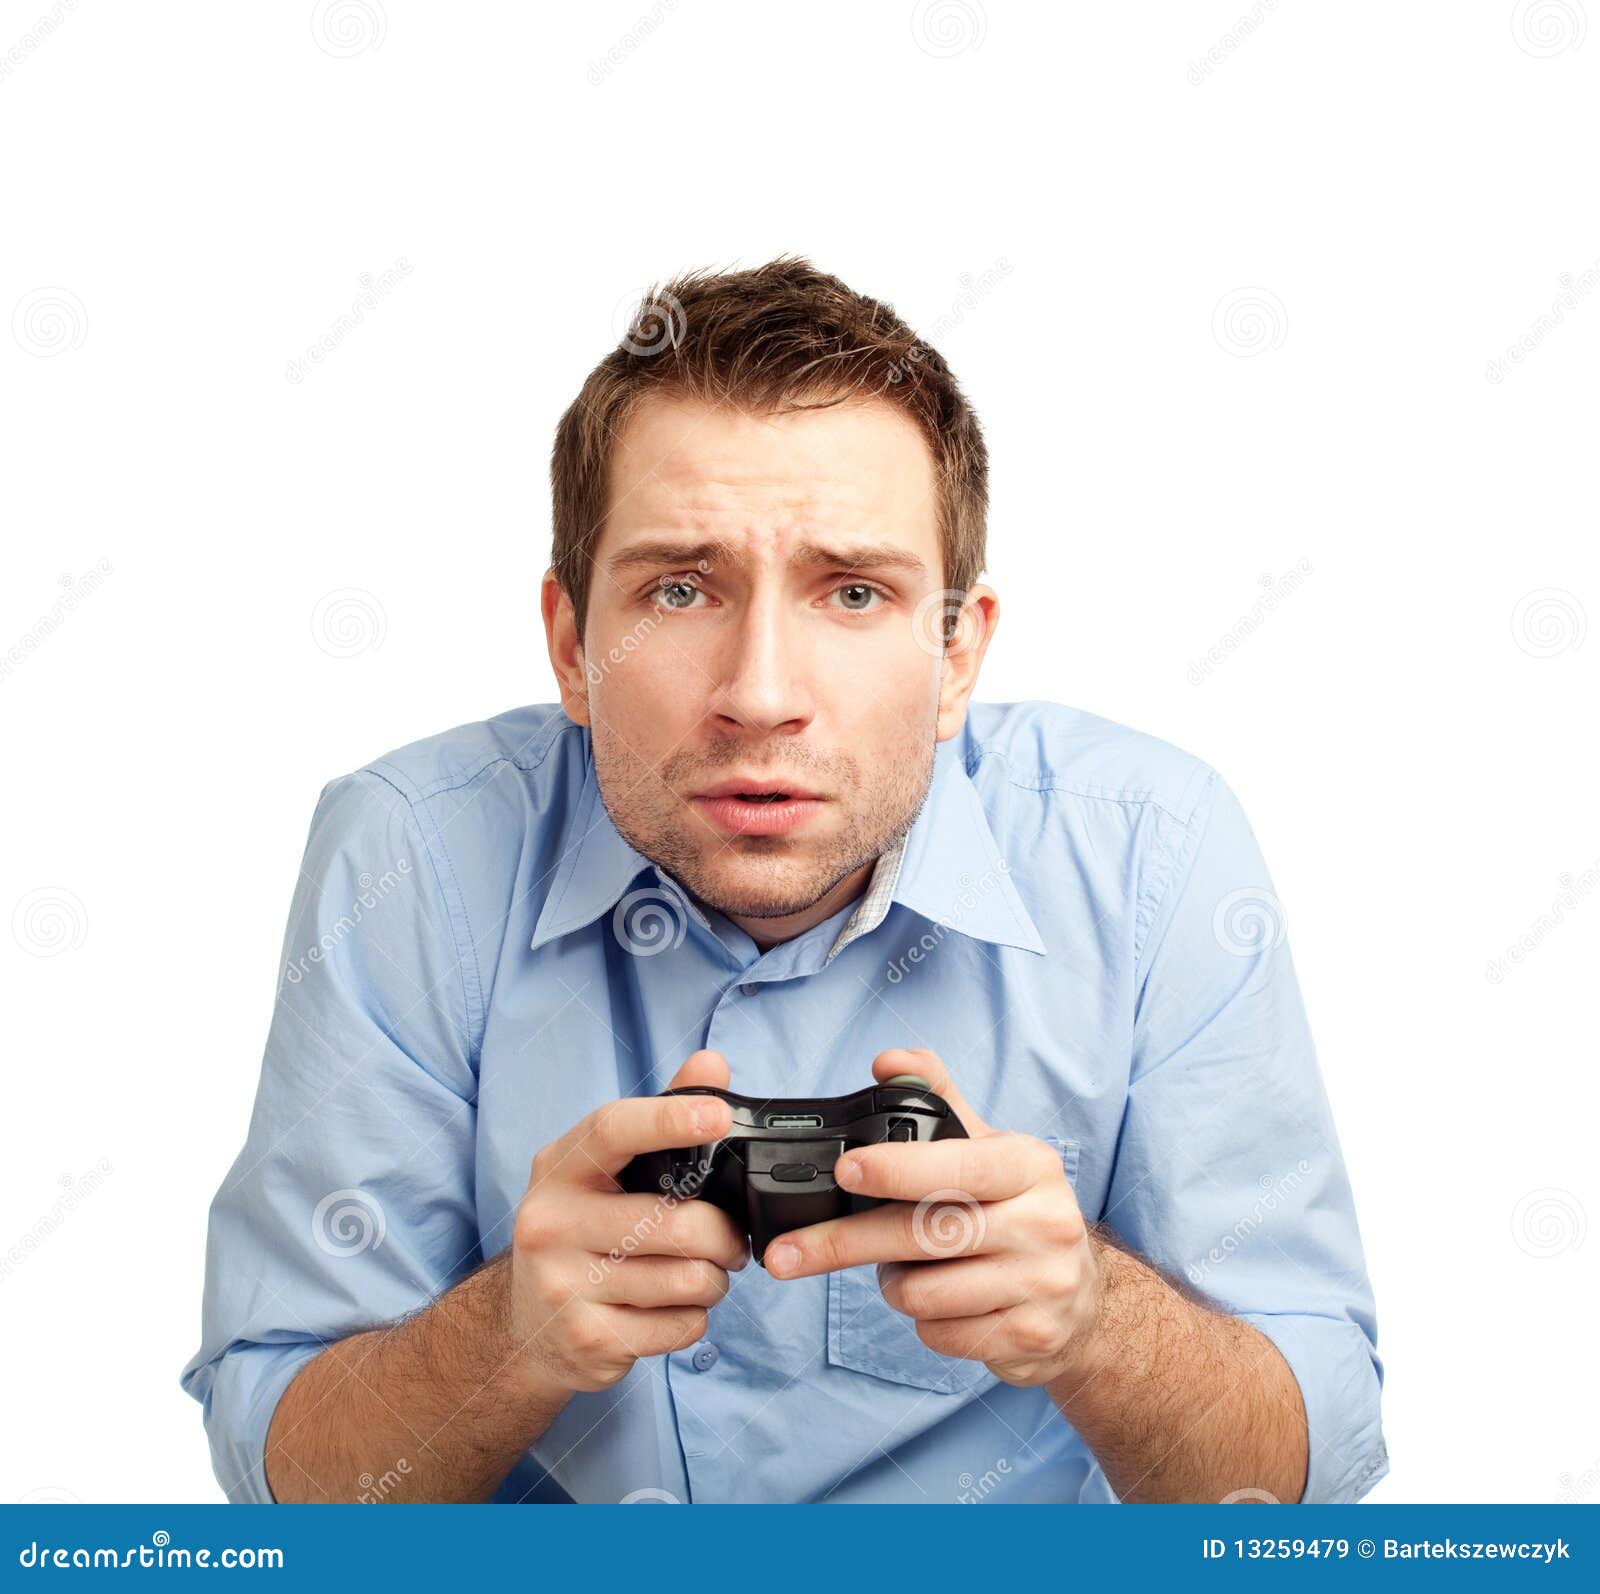 Playing video game Stock Photos, Royalty Free Playing video game